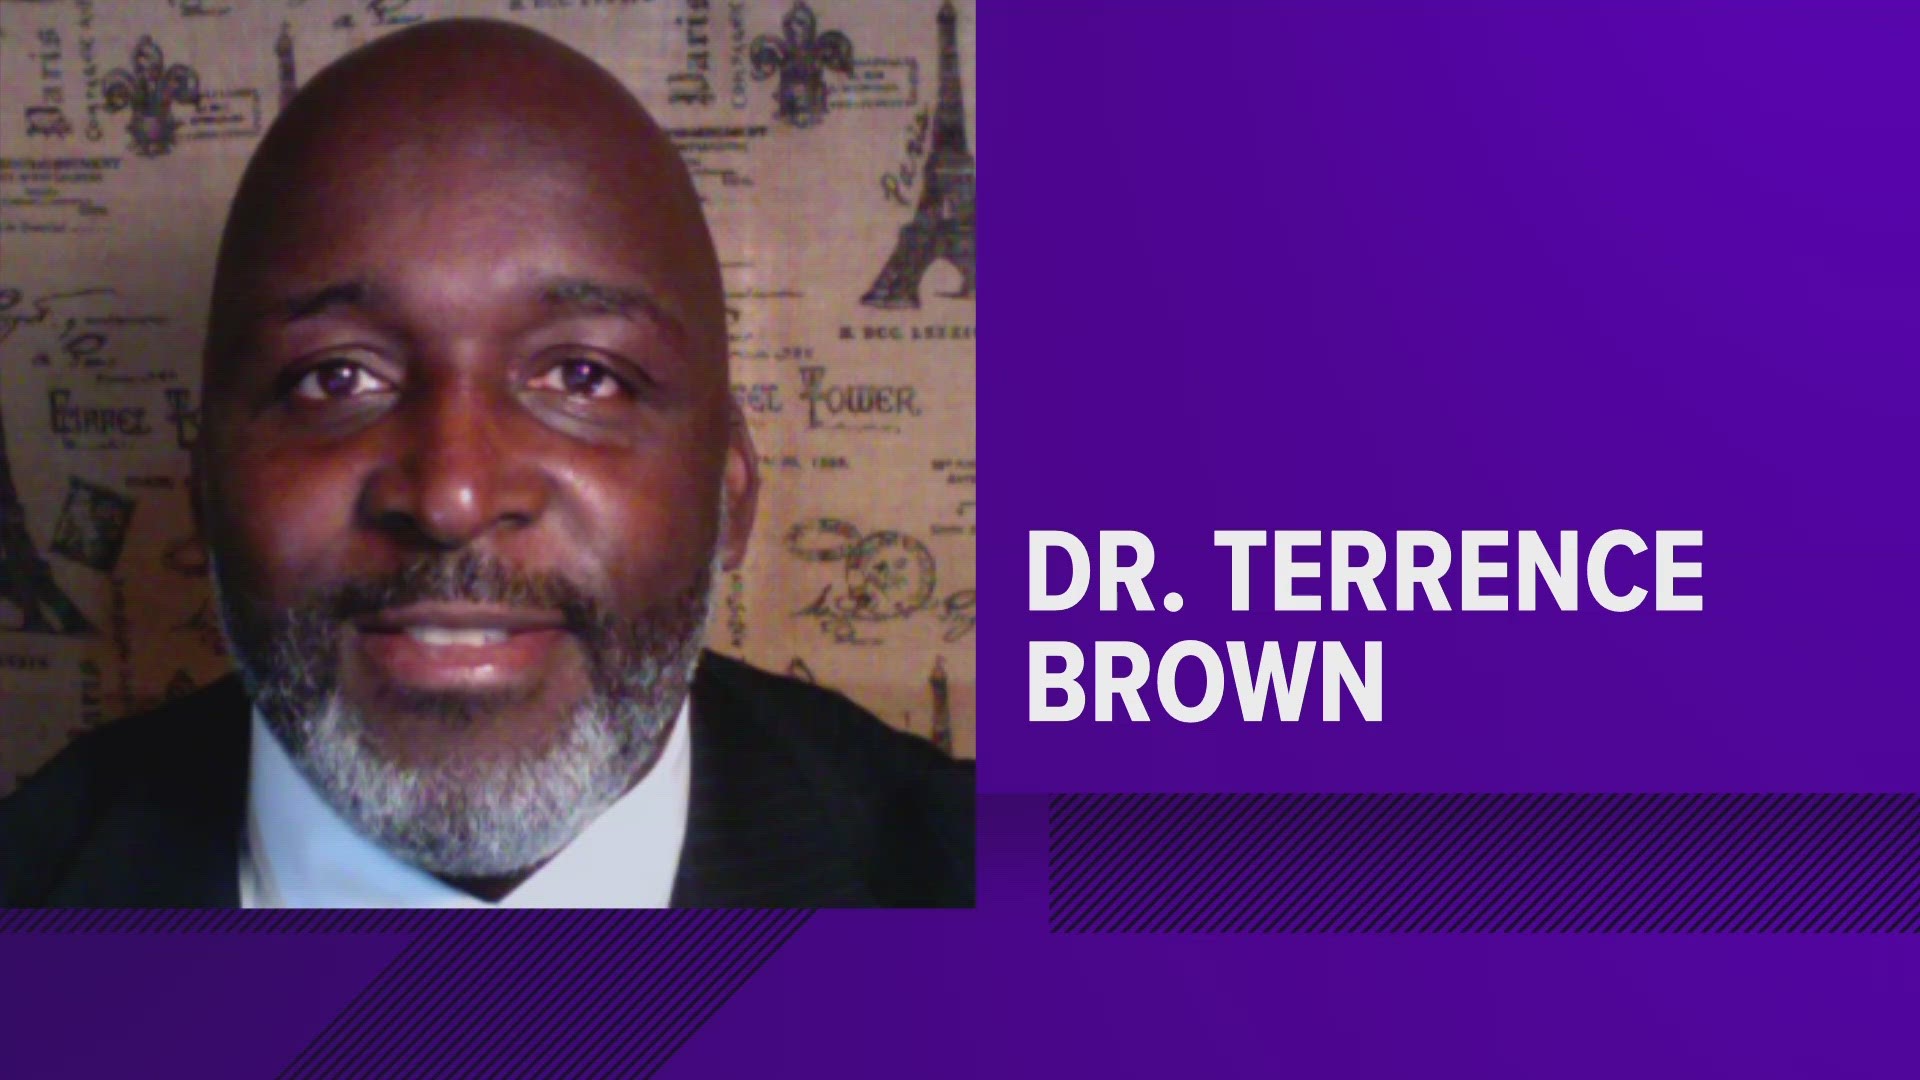 Dr. Terrence A. Brown is currently the Deputy Superintendent for the Forrest City School District. He will begin his new position with WMSD on July 1, 2023.